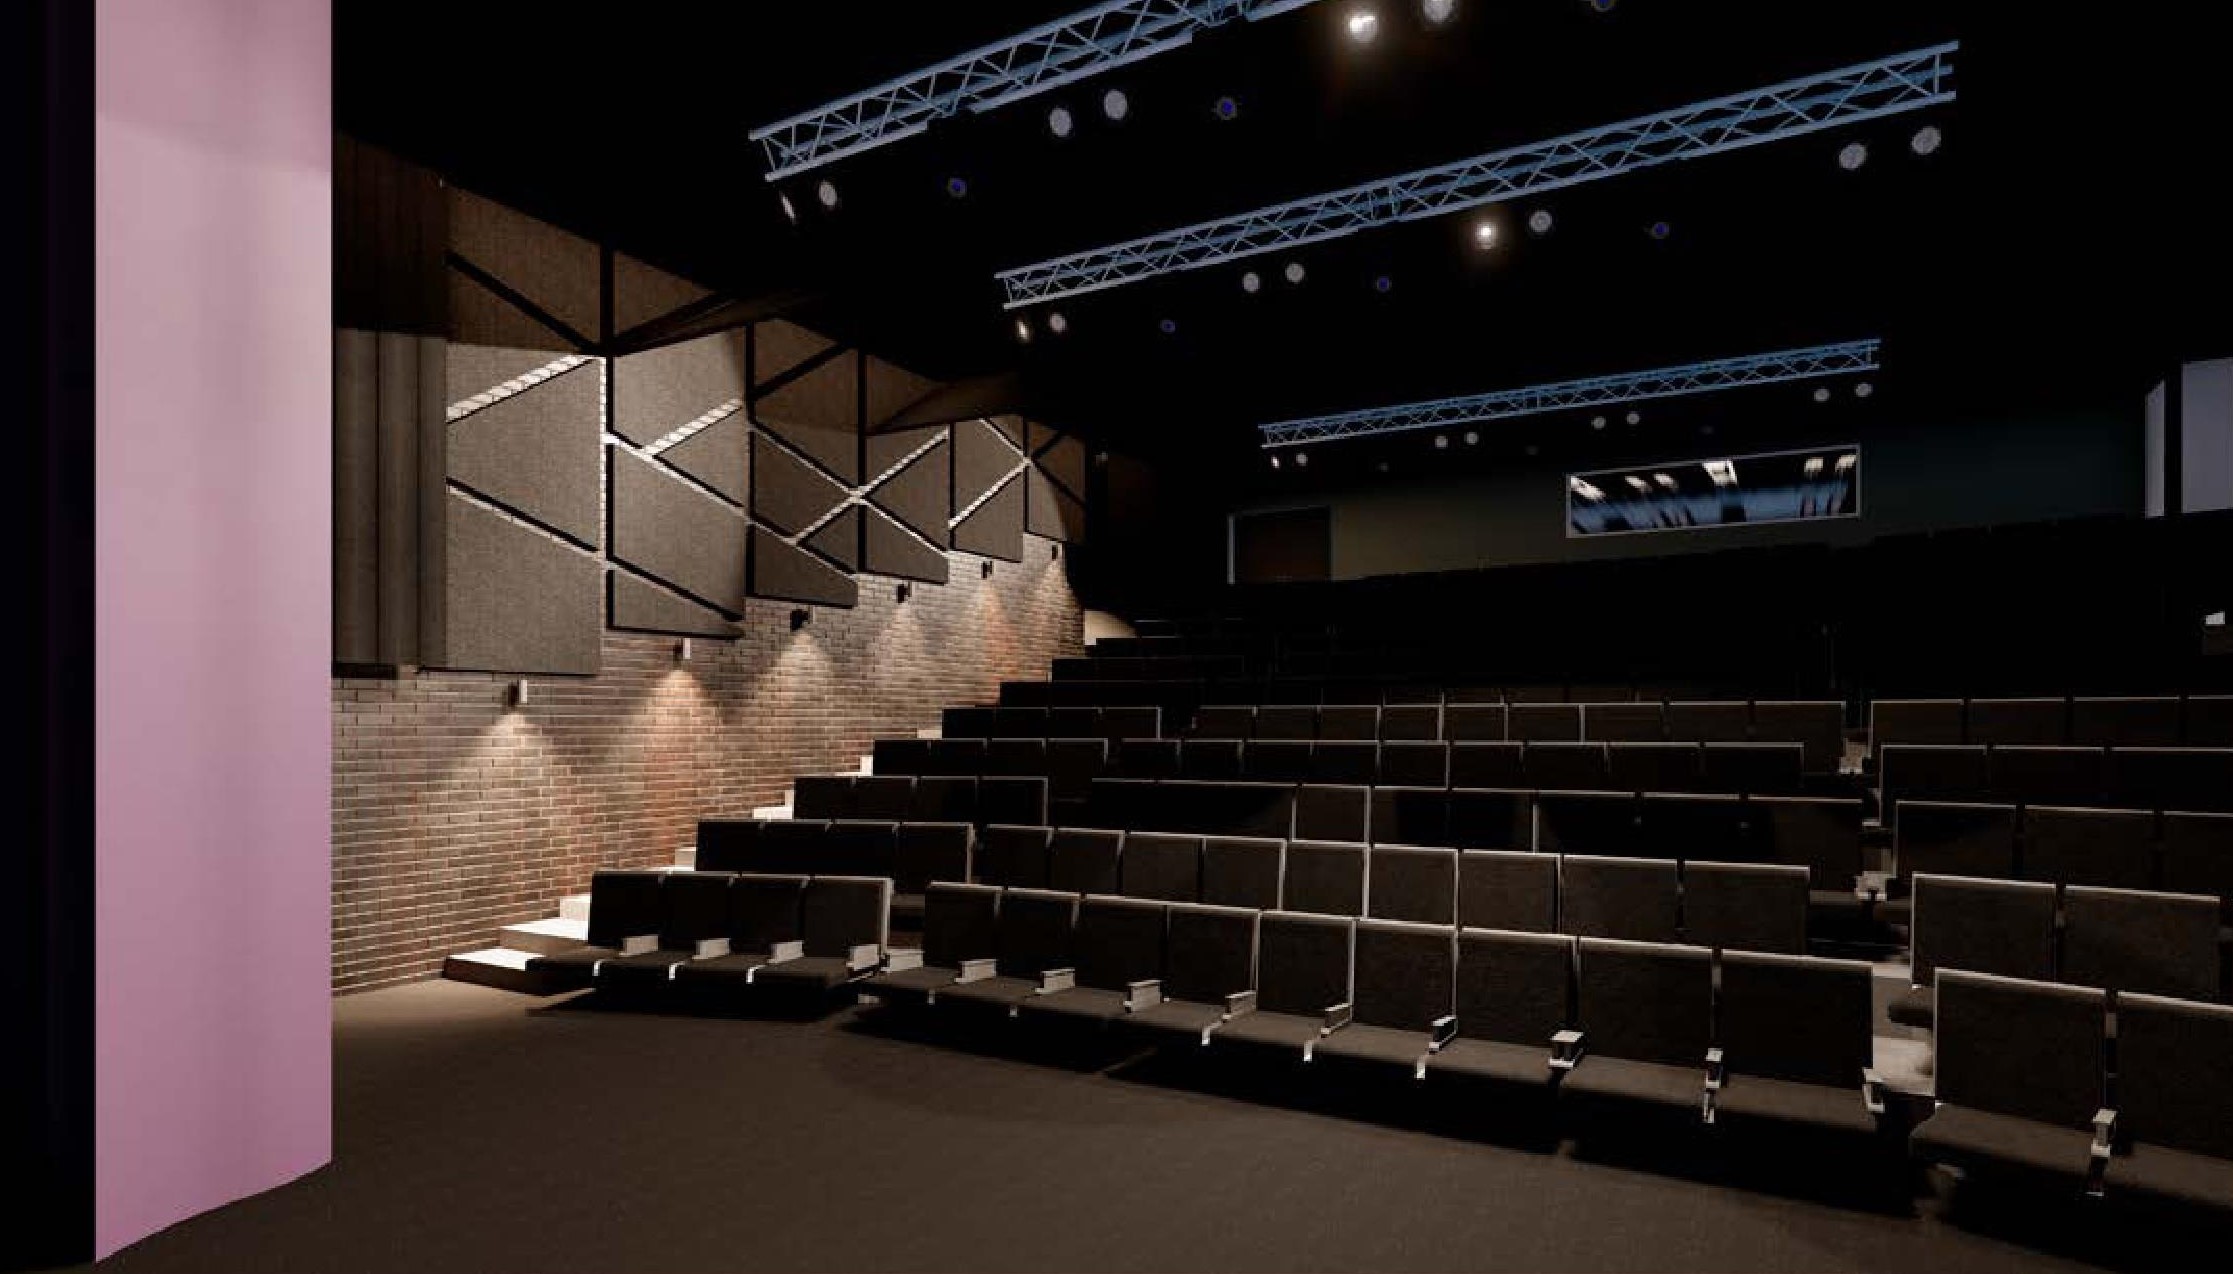 An artist impression of the auditorium with tiered seating and geometric acoustic shapes